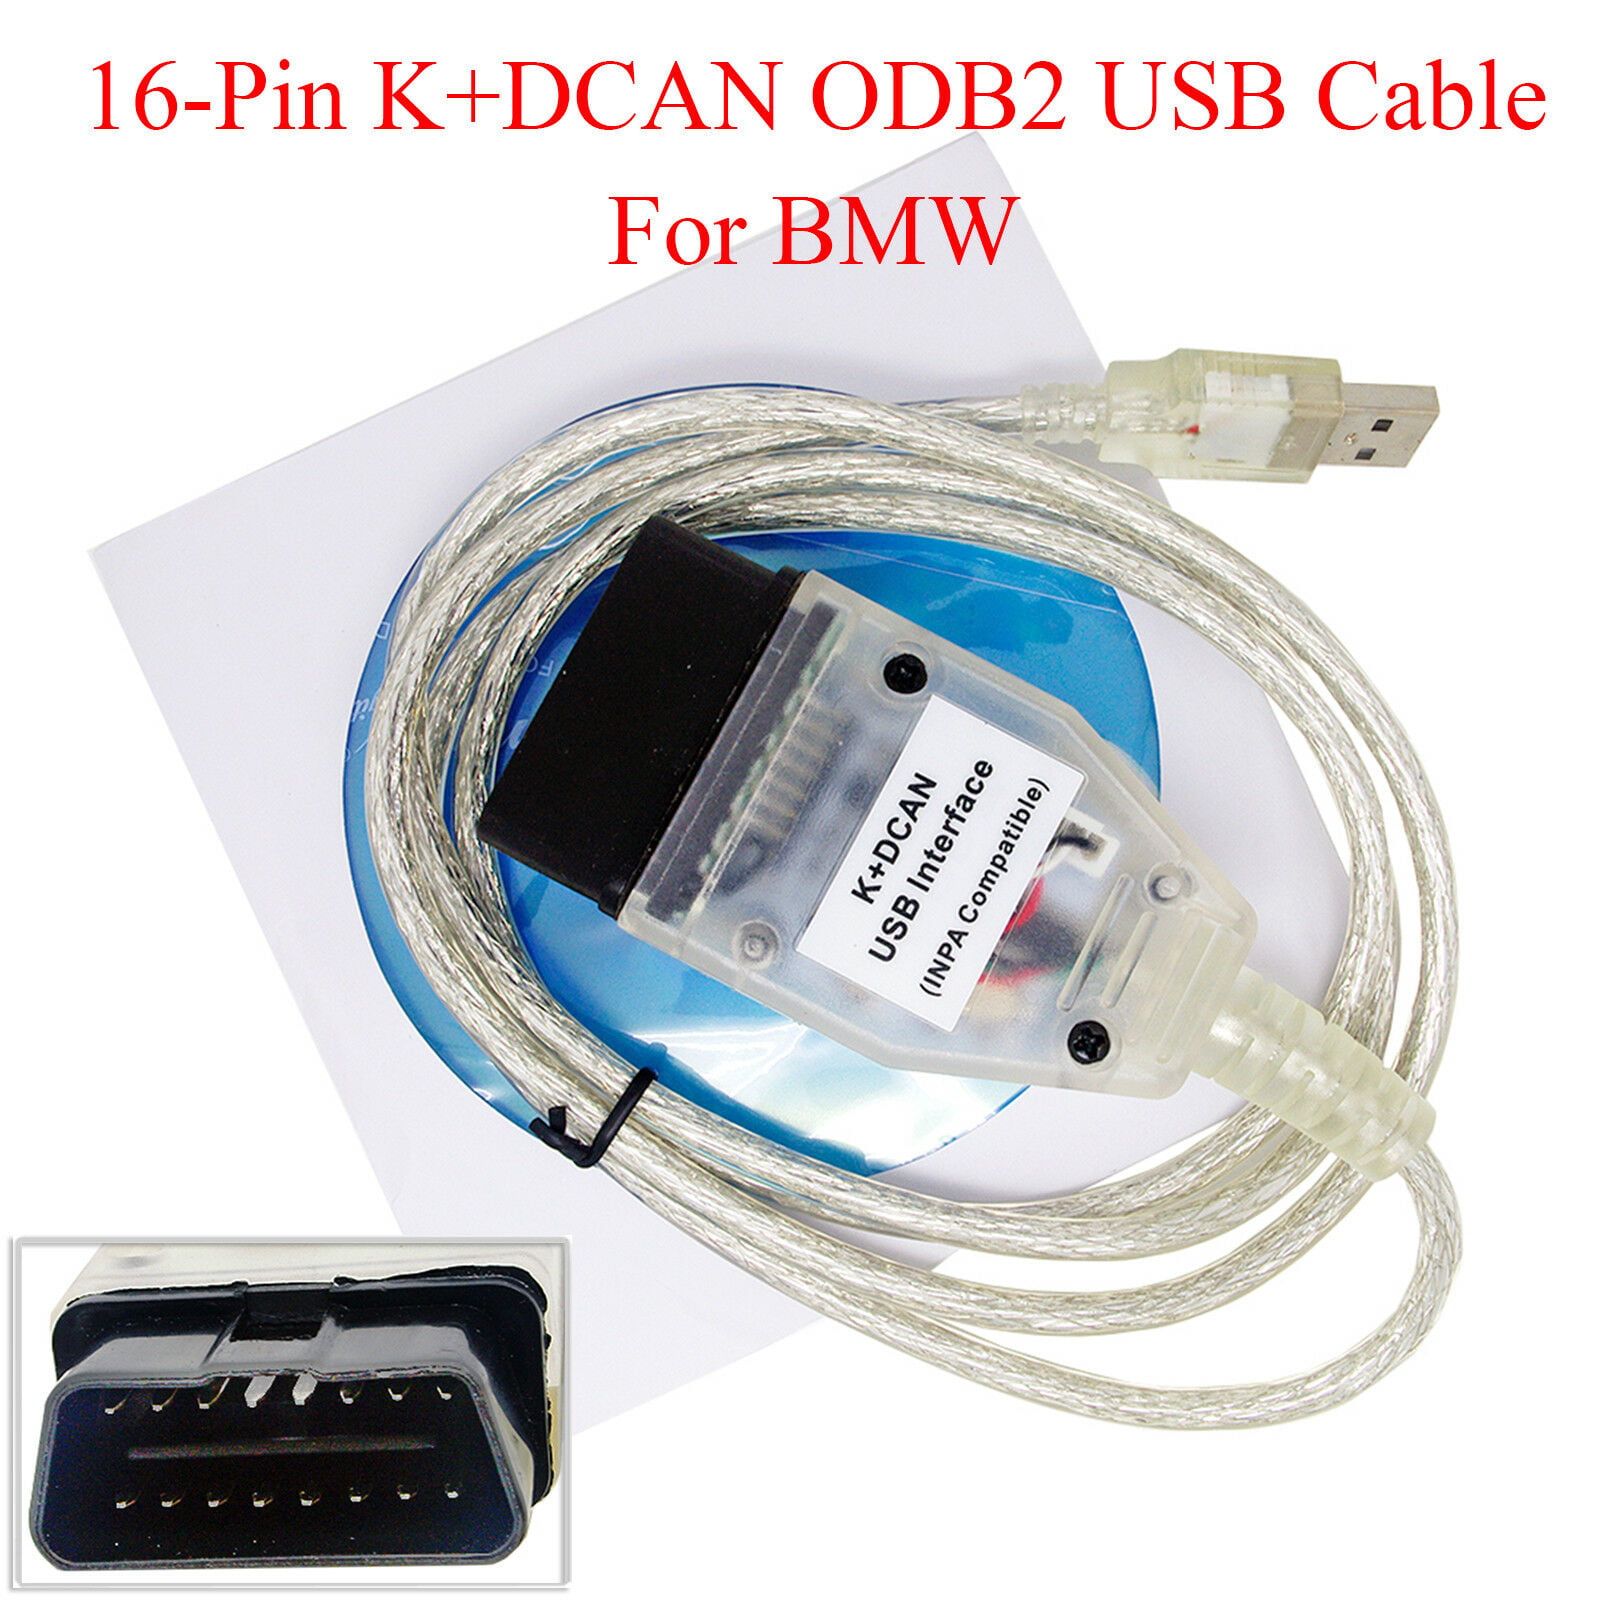 For BMW INPA K+DCAN USB Interface OBD2 OBDII 16 Pin Car Diagnostic Tool Cable 